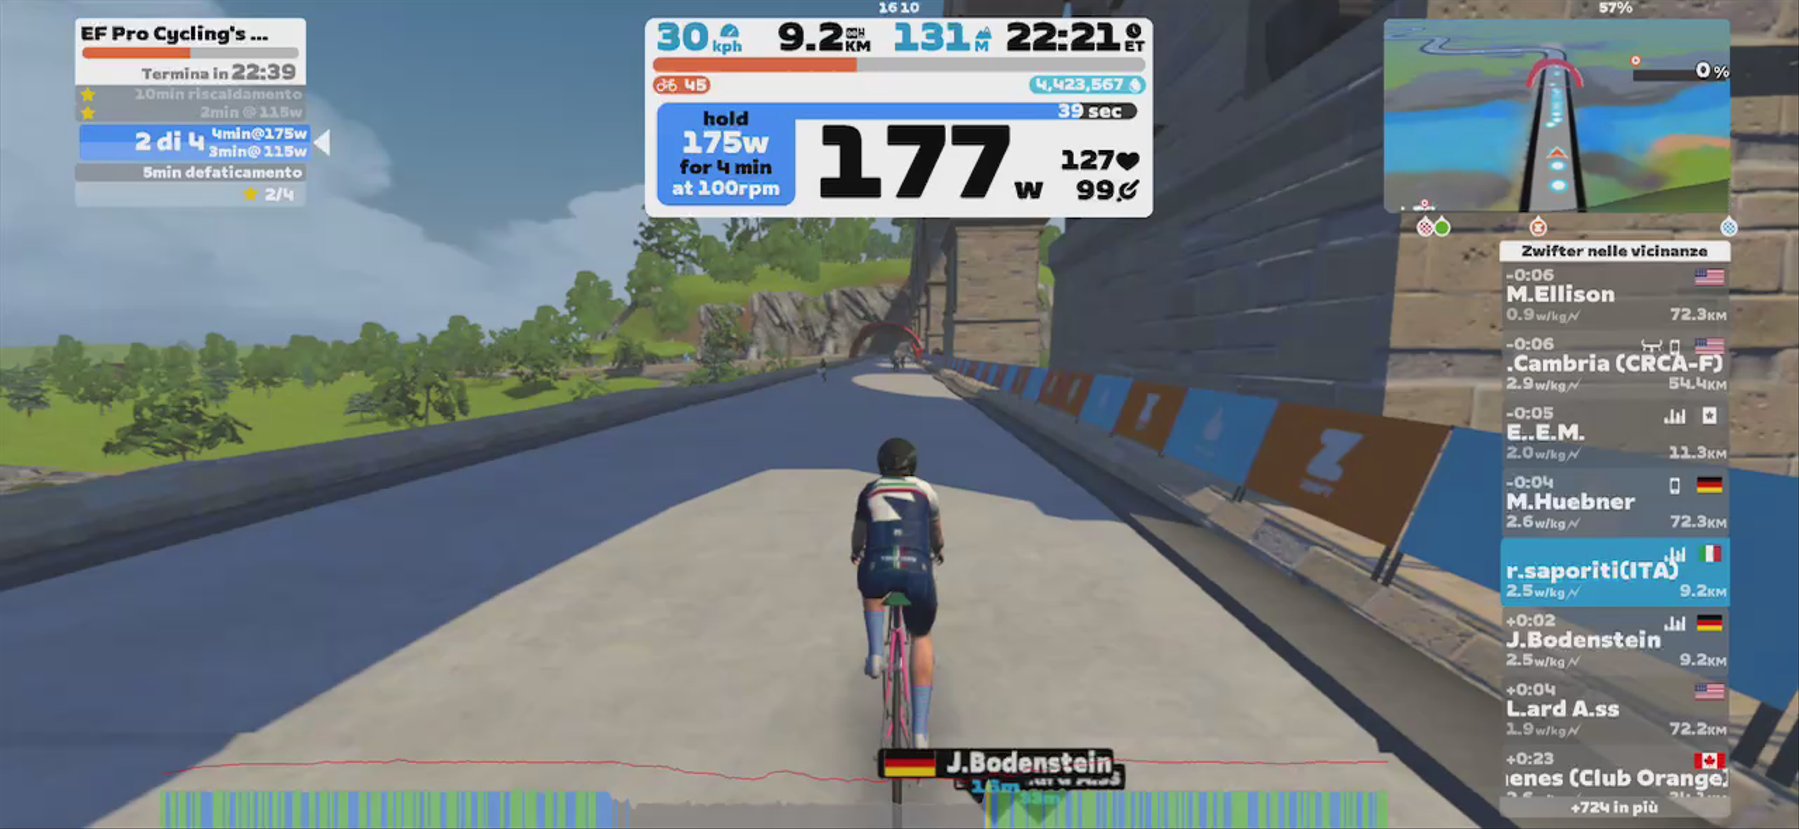 Zwift - EF Pro Cycling's Red Day Workout in France